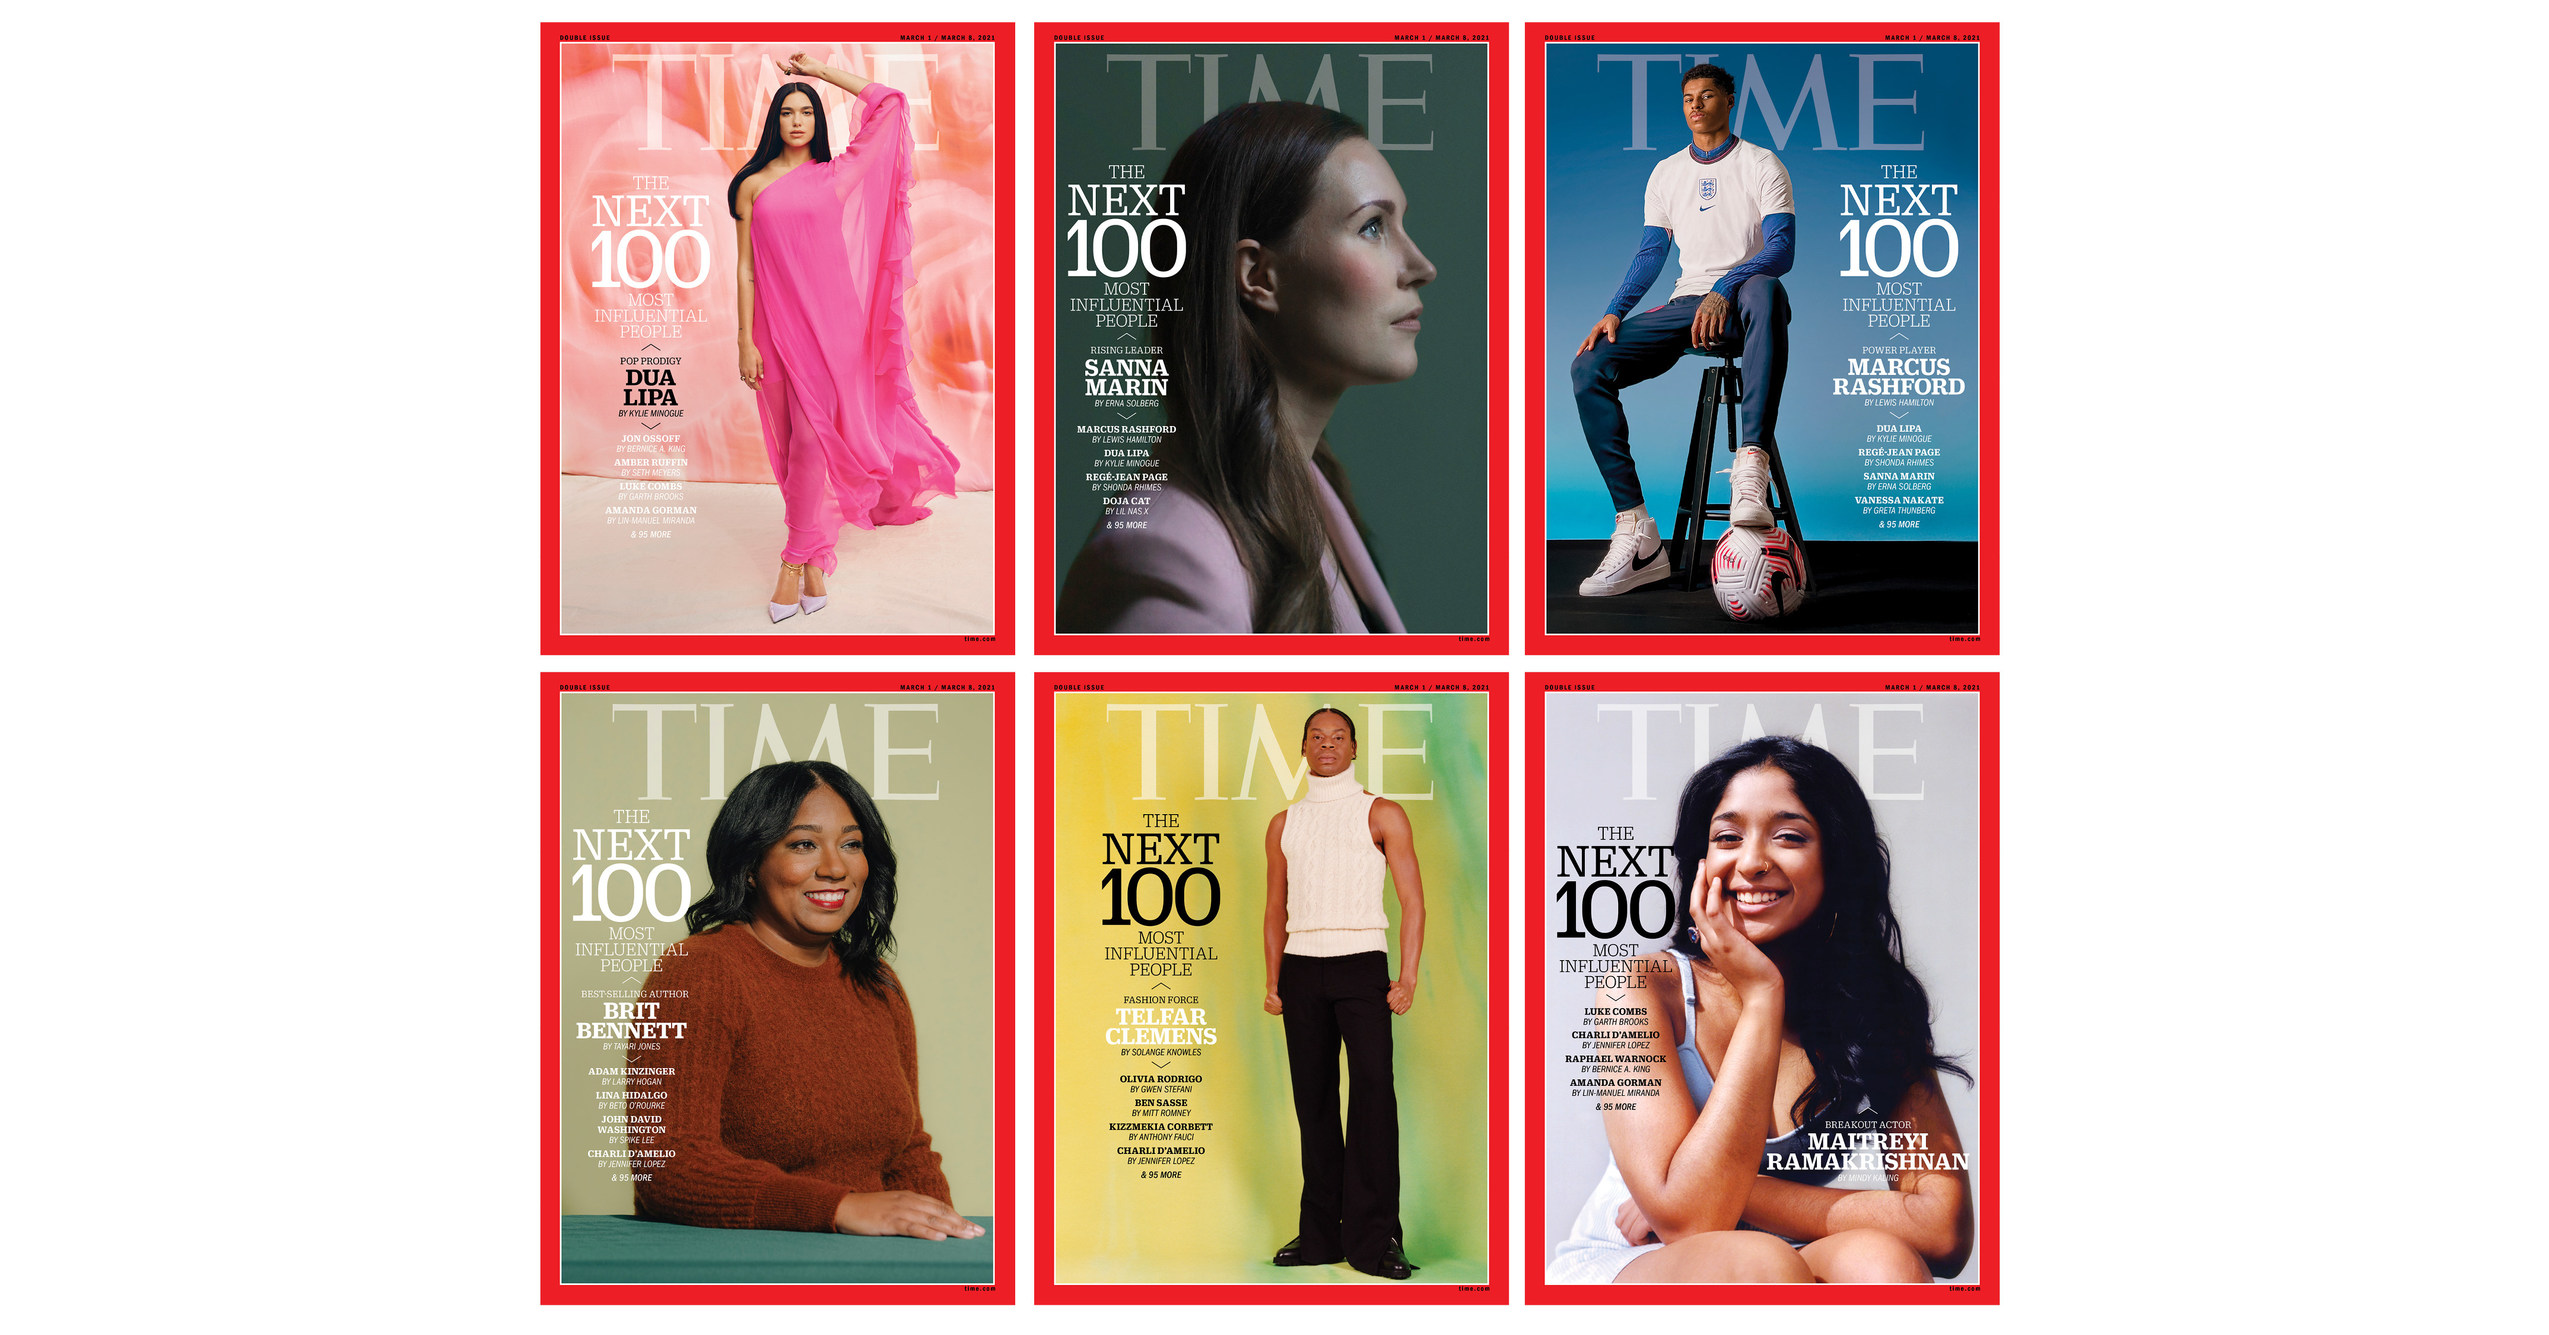 Who made the 2021 TIME100 most influential people list?